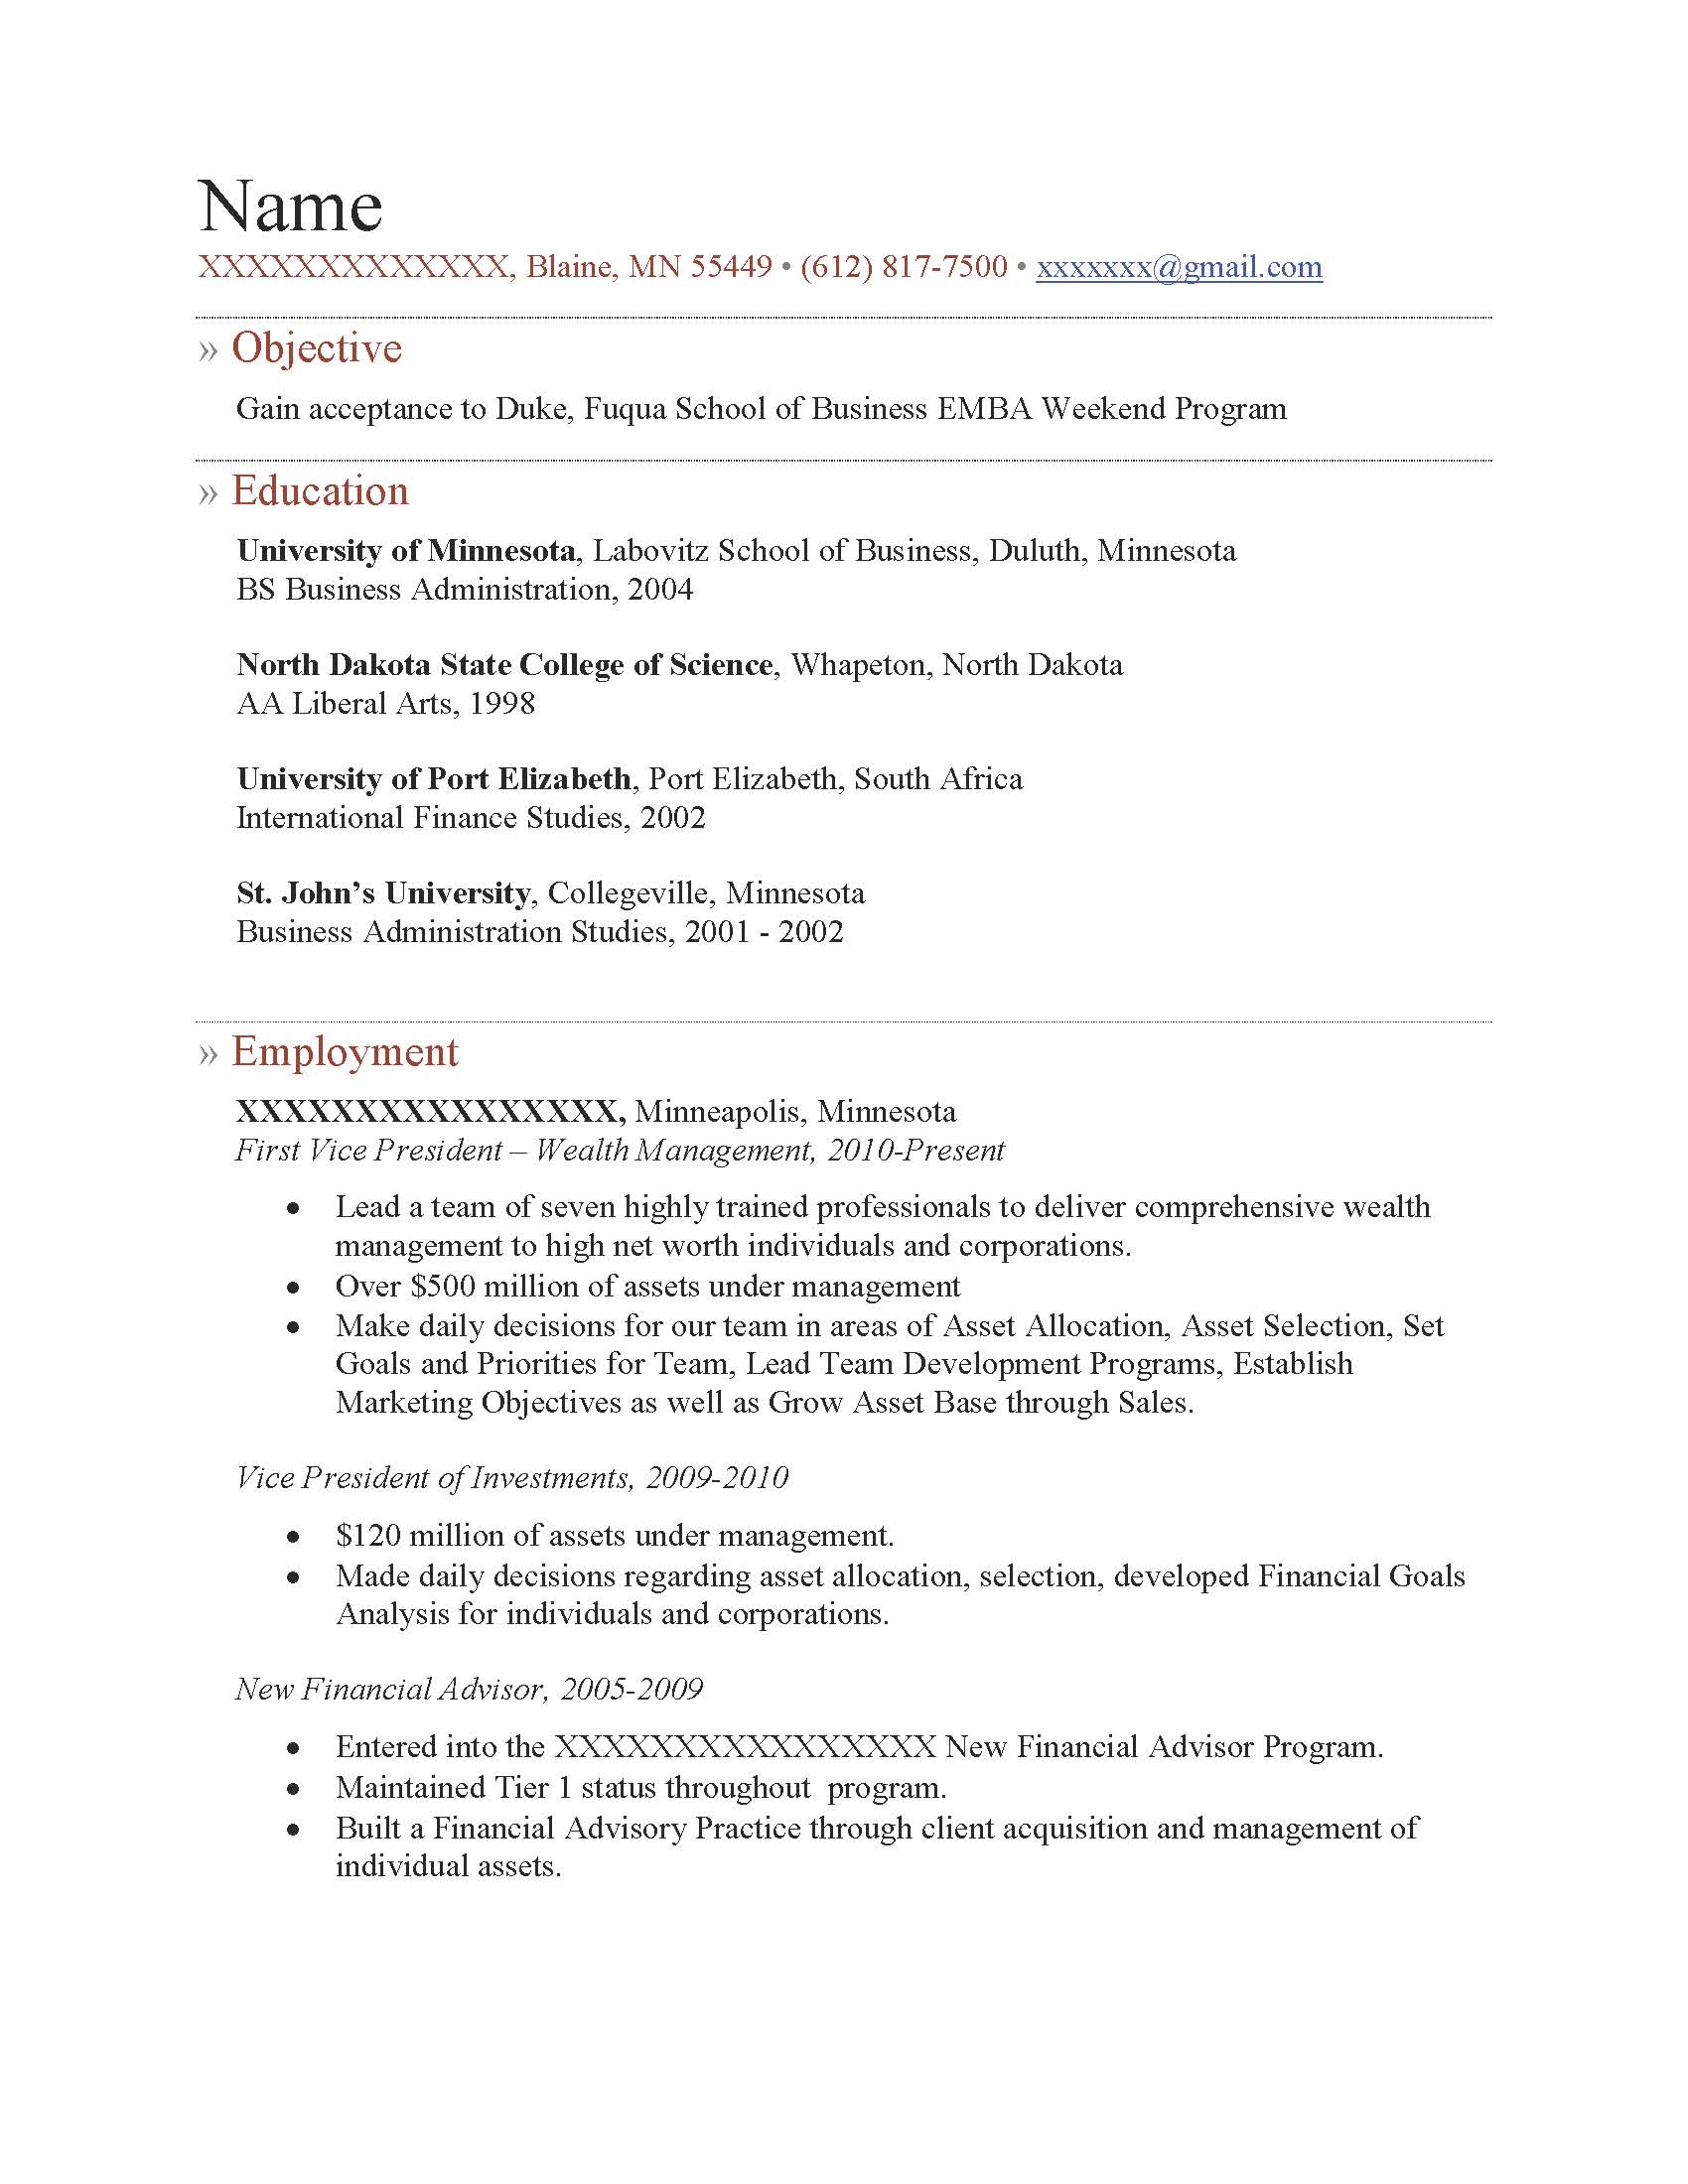 Resume for emba